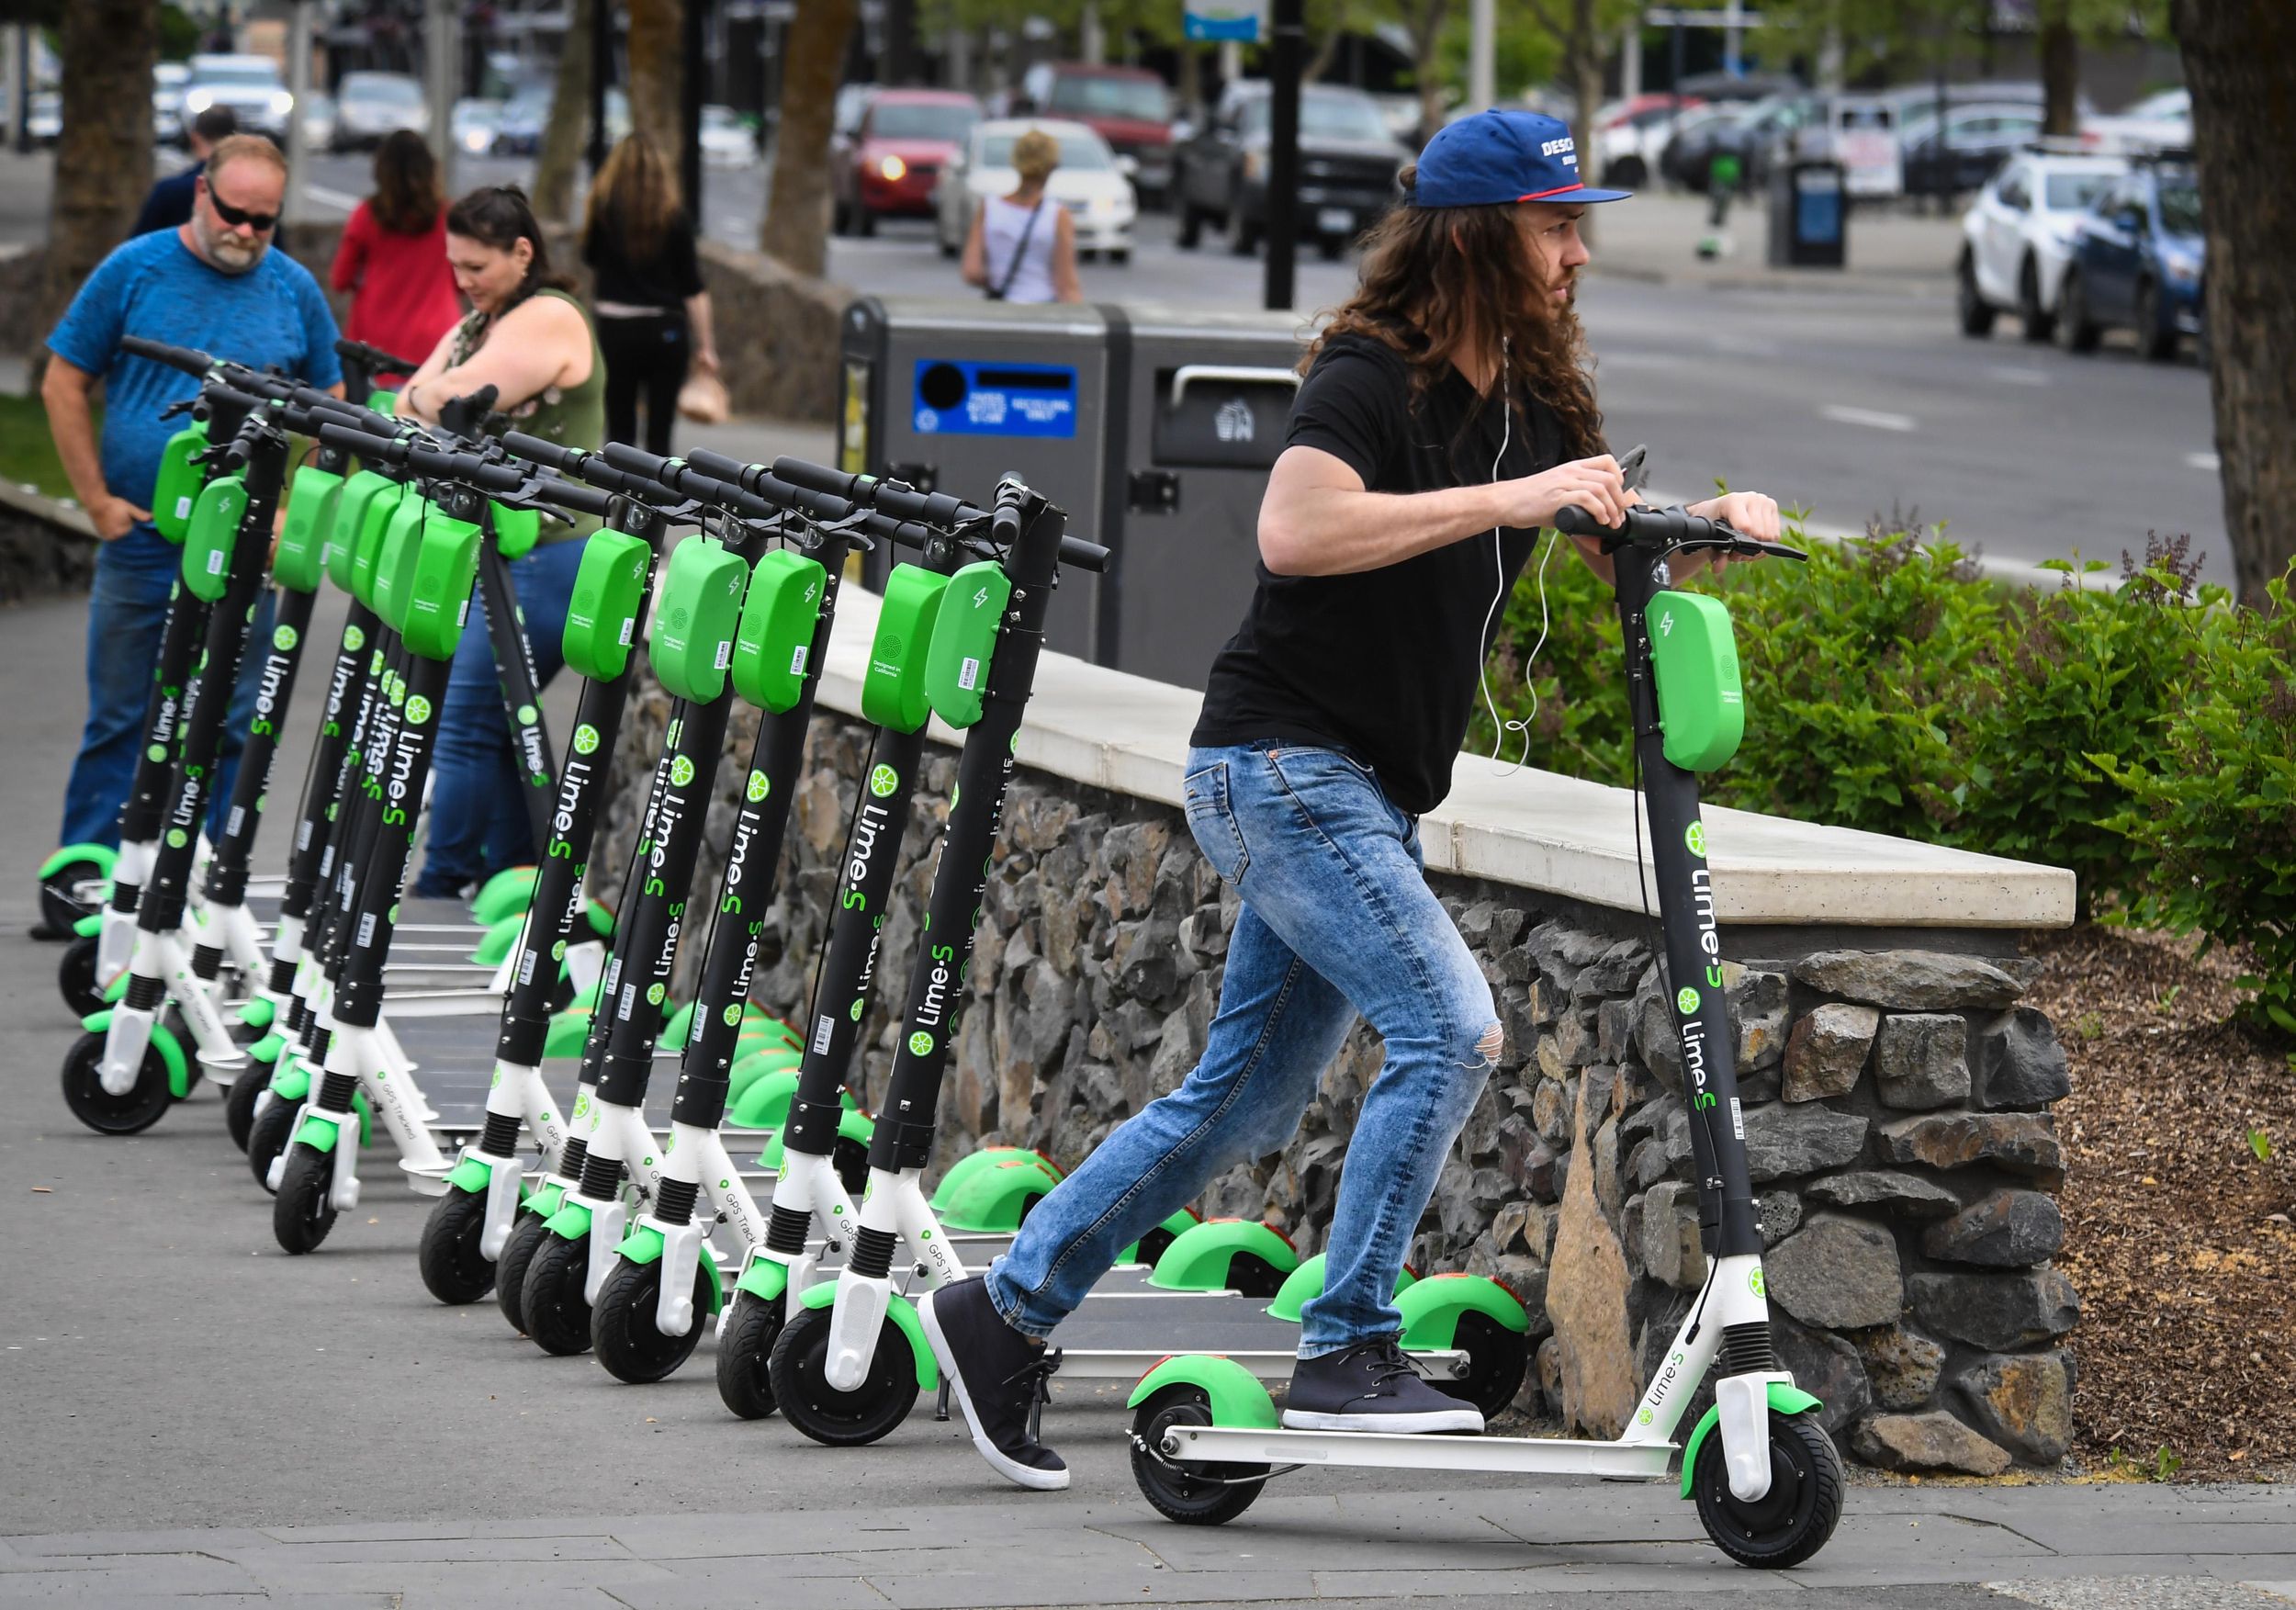 Electrical Scooter Companies Have Large Financial Losses